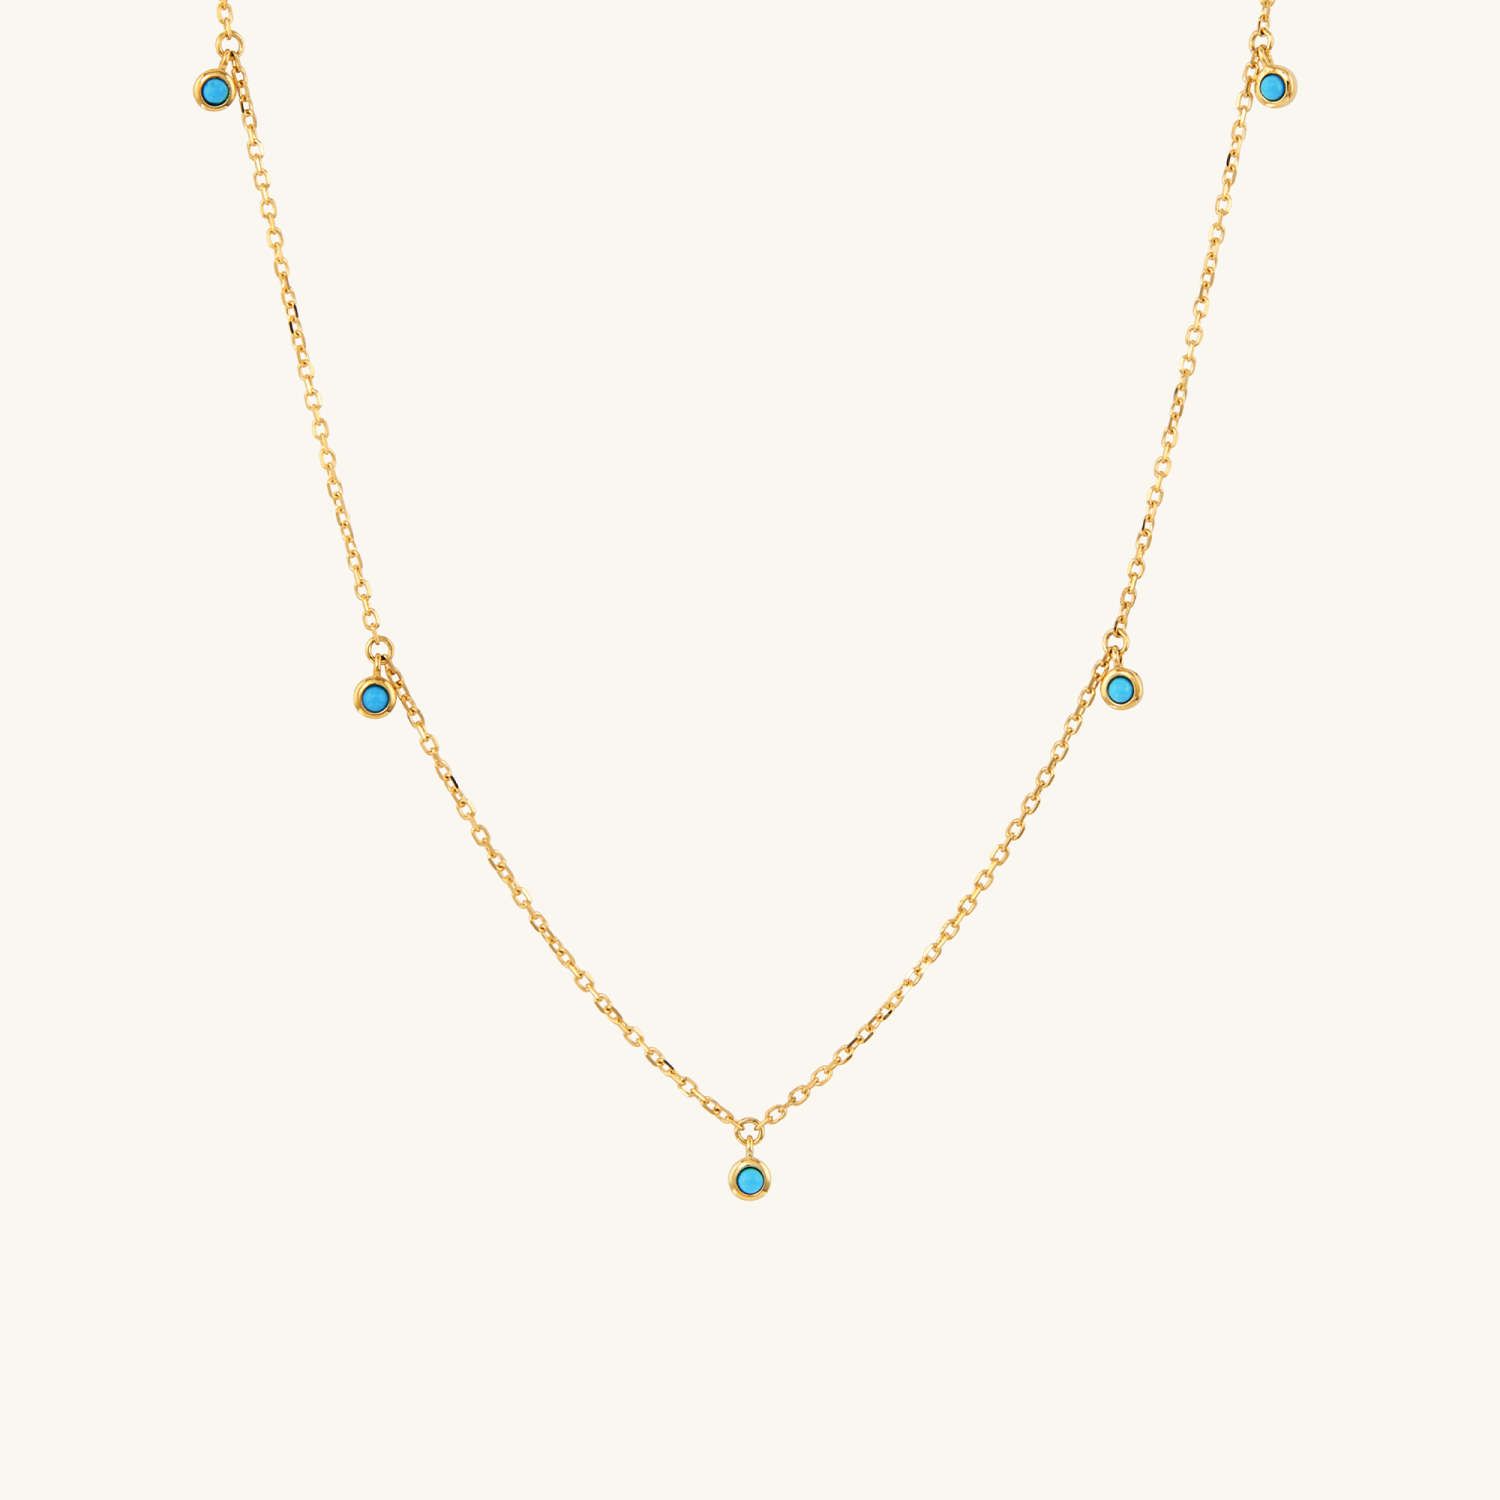 Turquoise Station Necklace - $275 | Mejuri (Global)